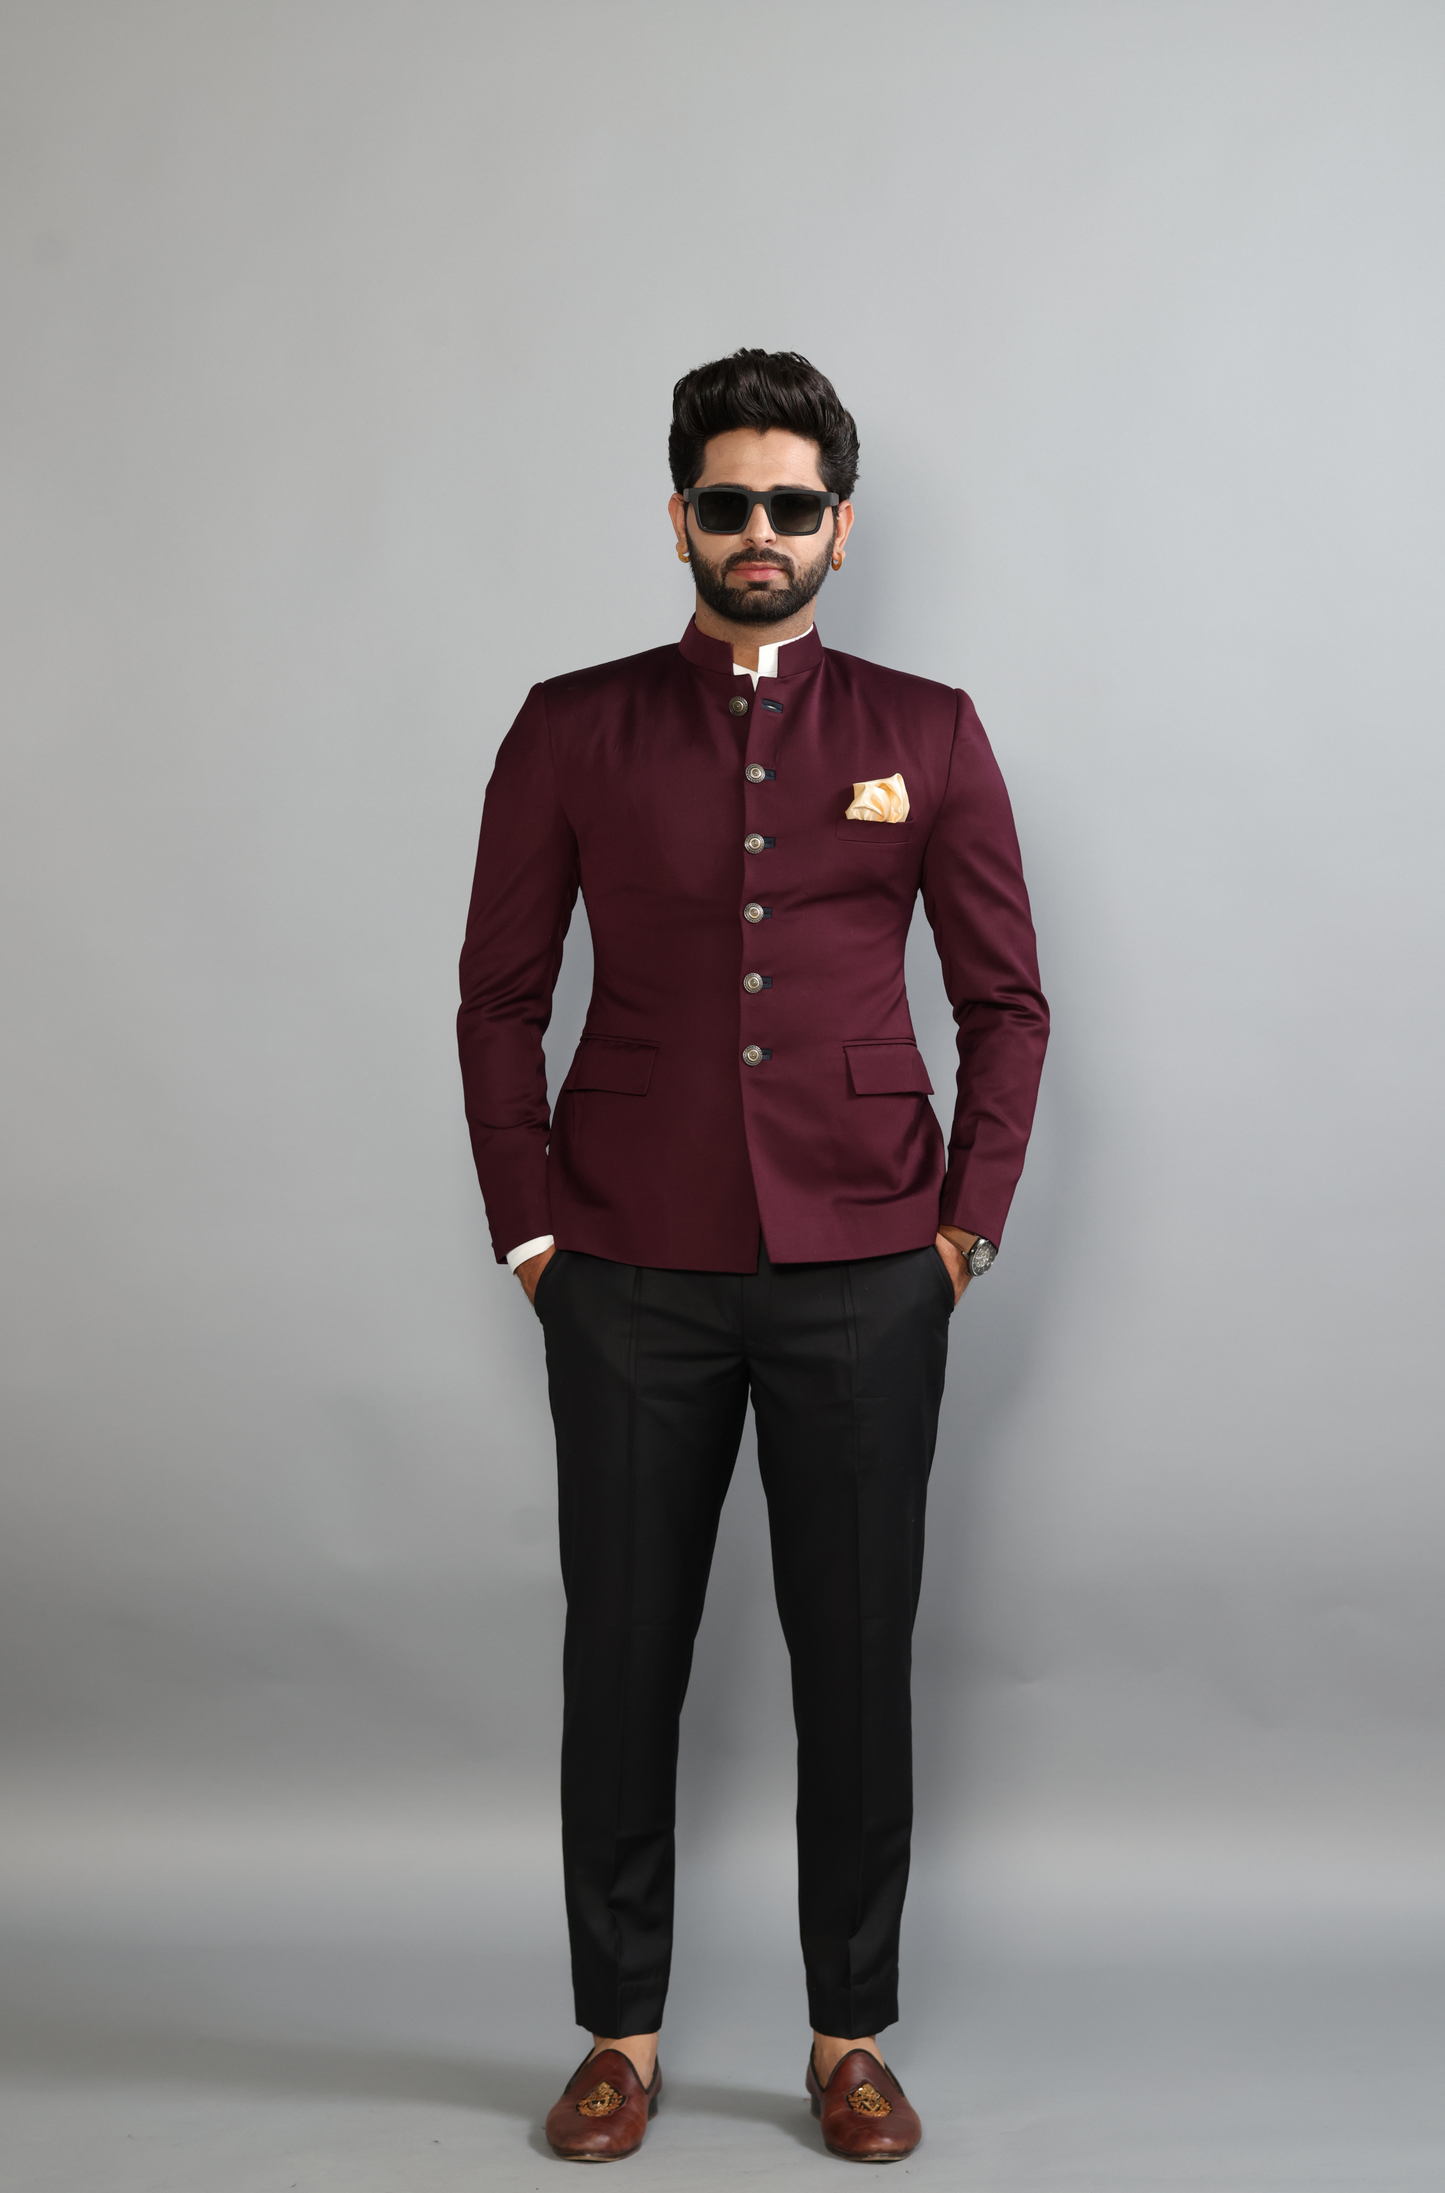 Exclusive Wine Jodhpuri Bandhgala with Black Trouser| Terry Rayon | Perfect for Cocktail party , Funtional wear, Festive  wear|